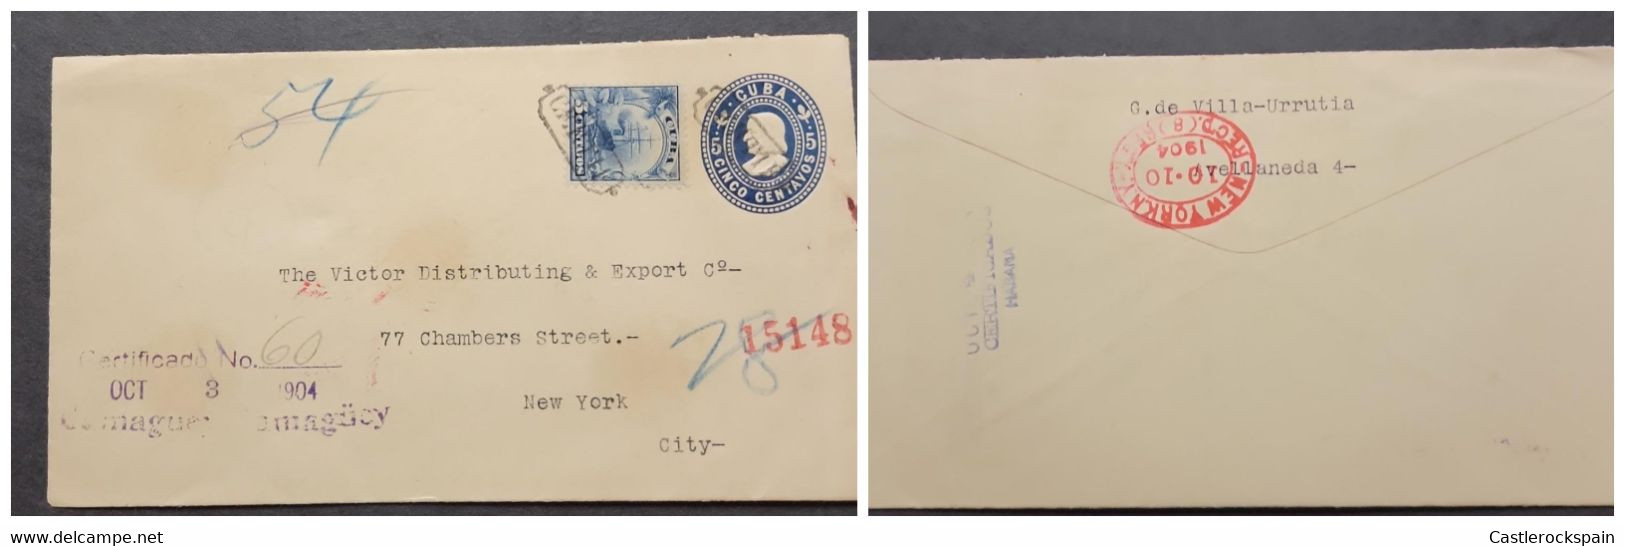 O) 1904 CUBA, CARIBBEAN, OCEAN LINER SCT 230 5c Blue, COLUMBUS  5c Ultra, CERTIFICATE FROM CAMAGUEY, NEW YORL BACKSTAMP, - Covers & Documents